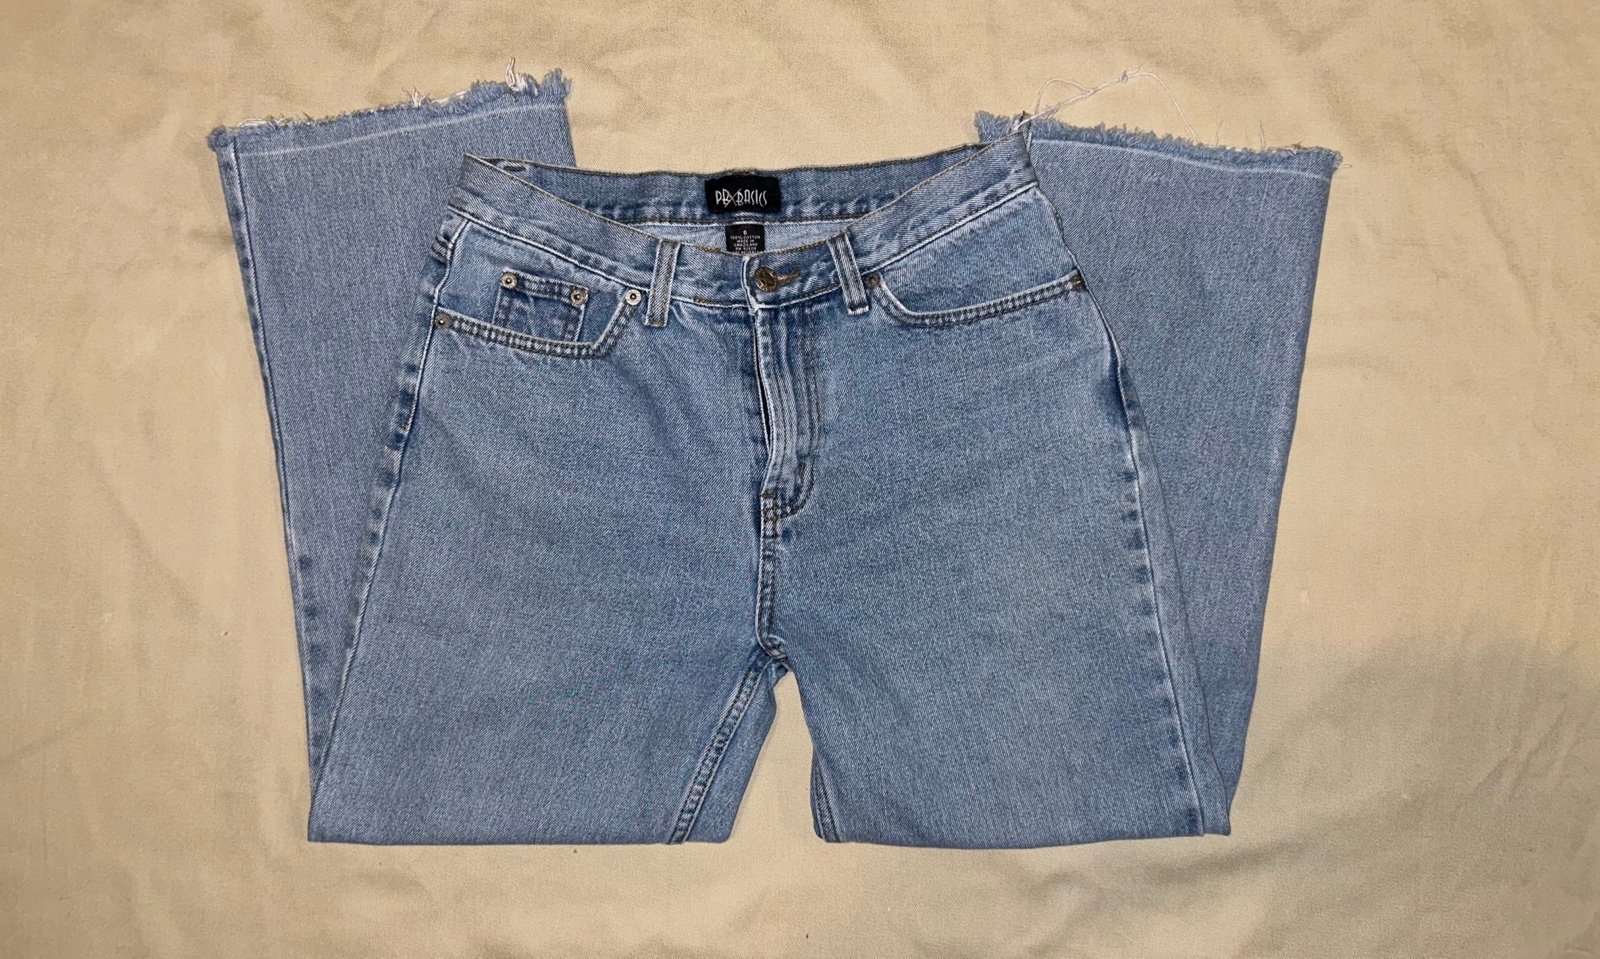 Cheap Vintage Y2K 90s PBX BASICS Jeans with Raw Hem Cropped Size 6 100% Cotton nK3bb9Ft3 Buying Cheap